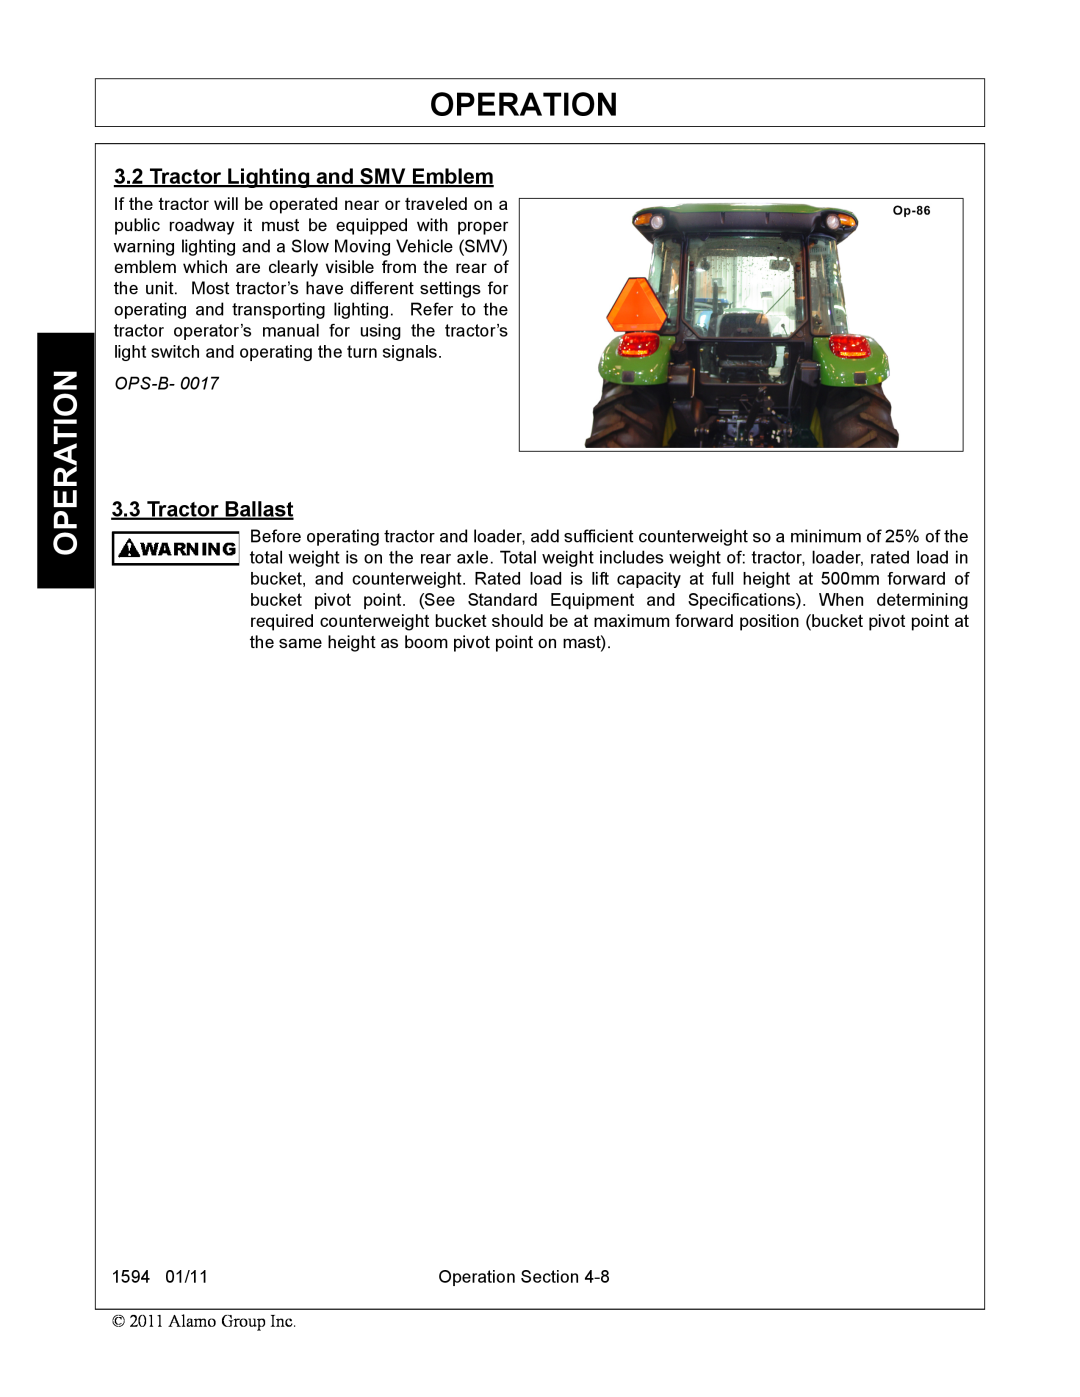 Rhino Mounts 1594 manual Operation, Tractor Lighting and SMV Emblem, Tractor Ballast, Ops-B 